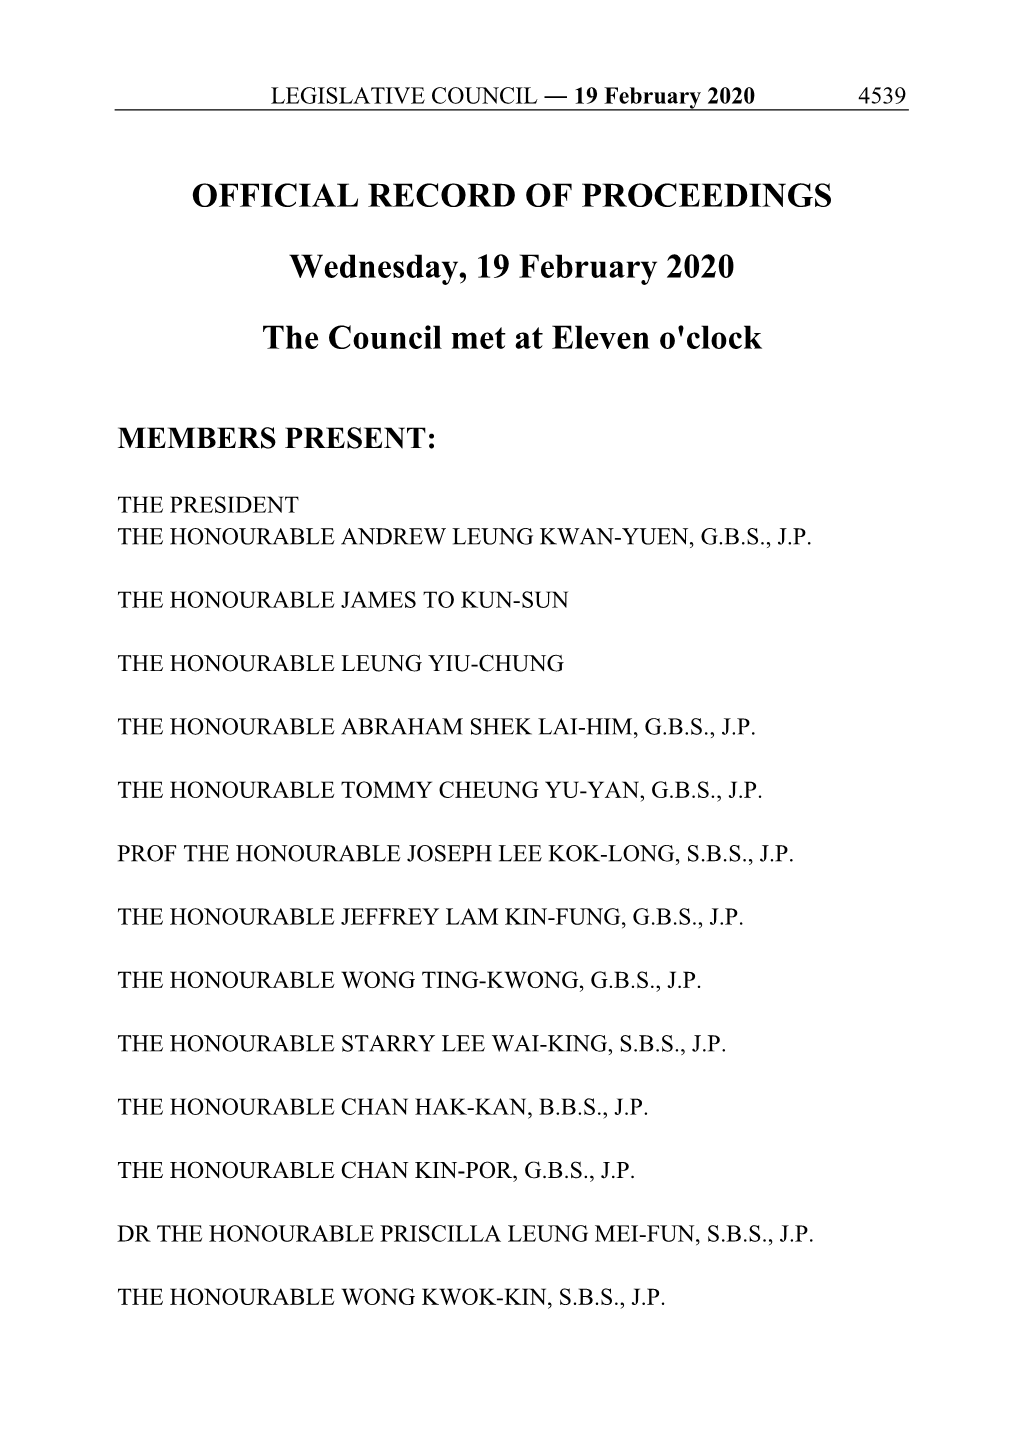 OFFICIAL RECORD of PROCEEDINGS Wednesday, 19 February 2020 the Council Met at Eleven O'clock